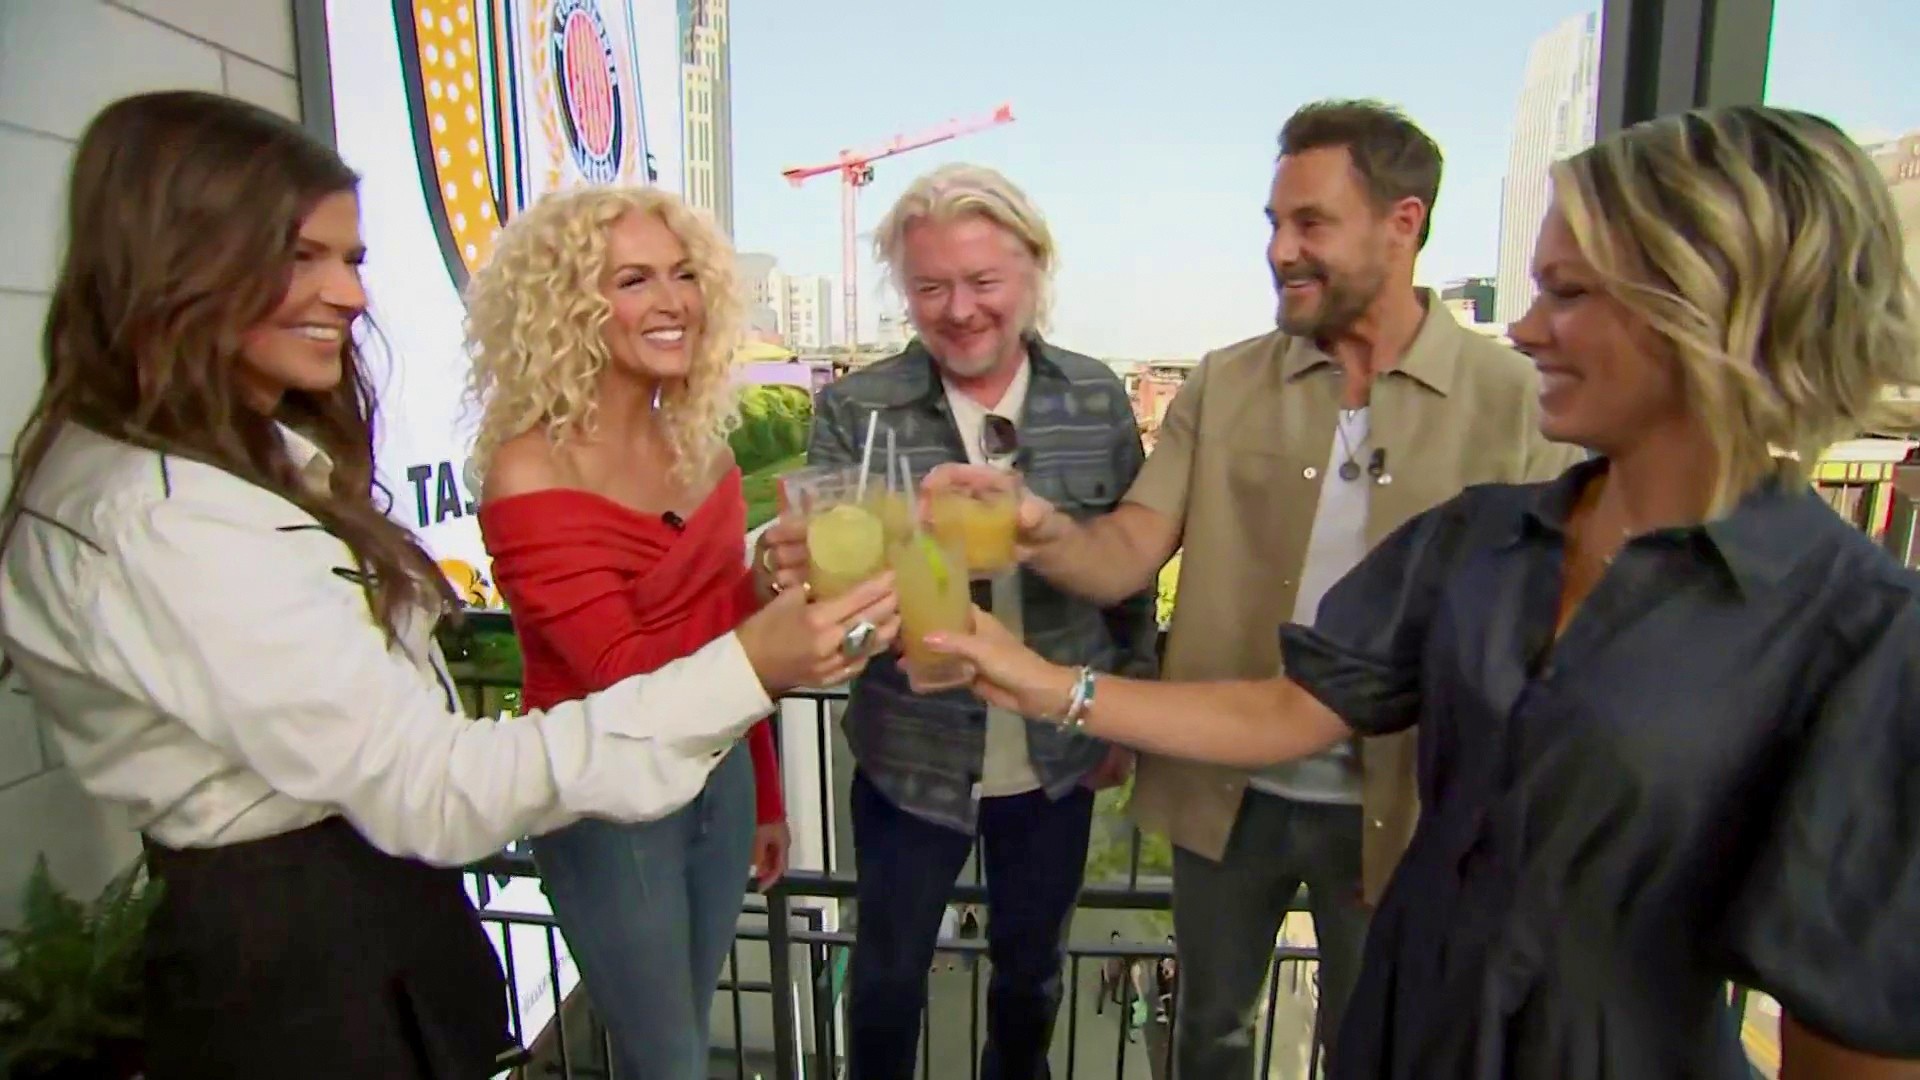 Little Big Town shares favorite Nashville stops and traditions